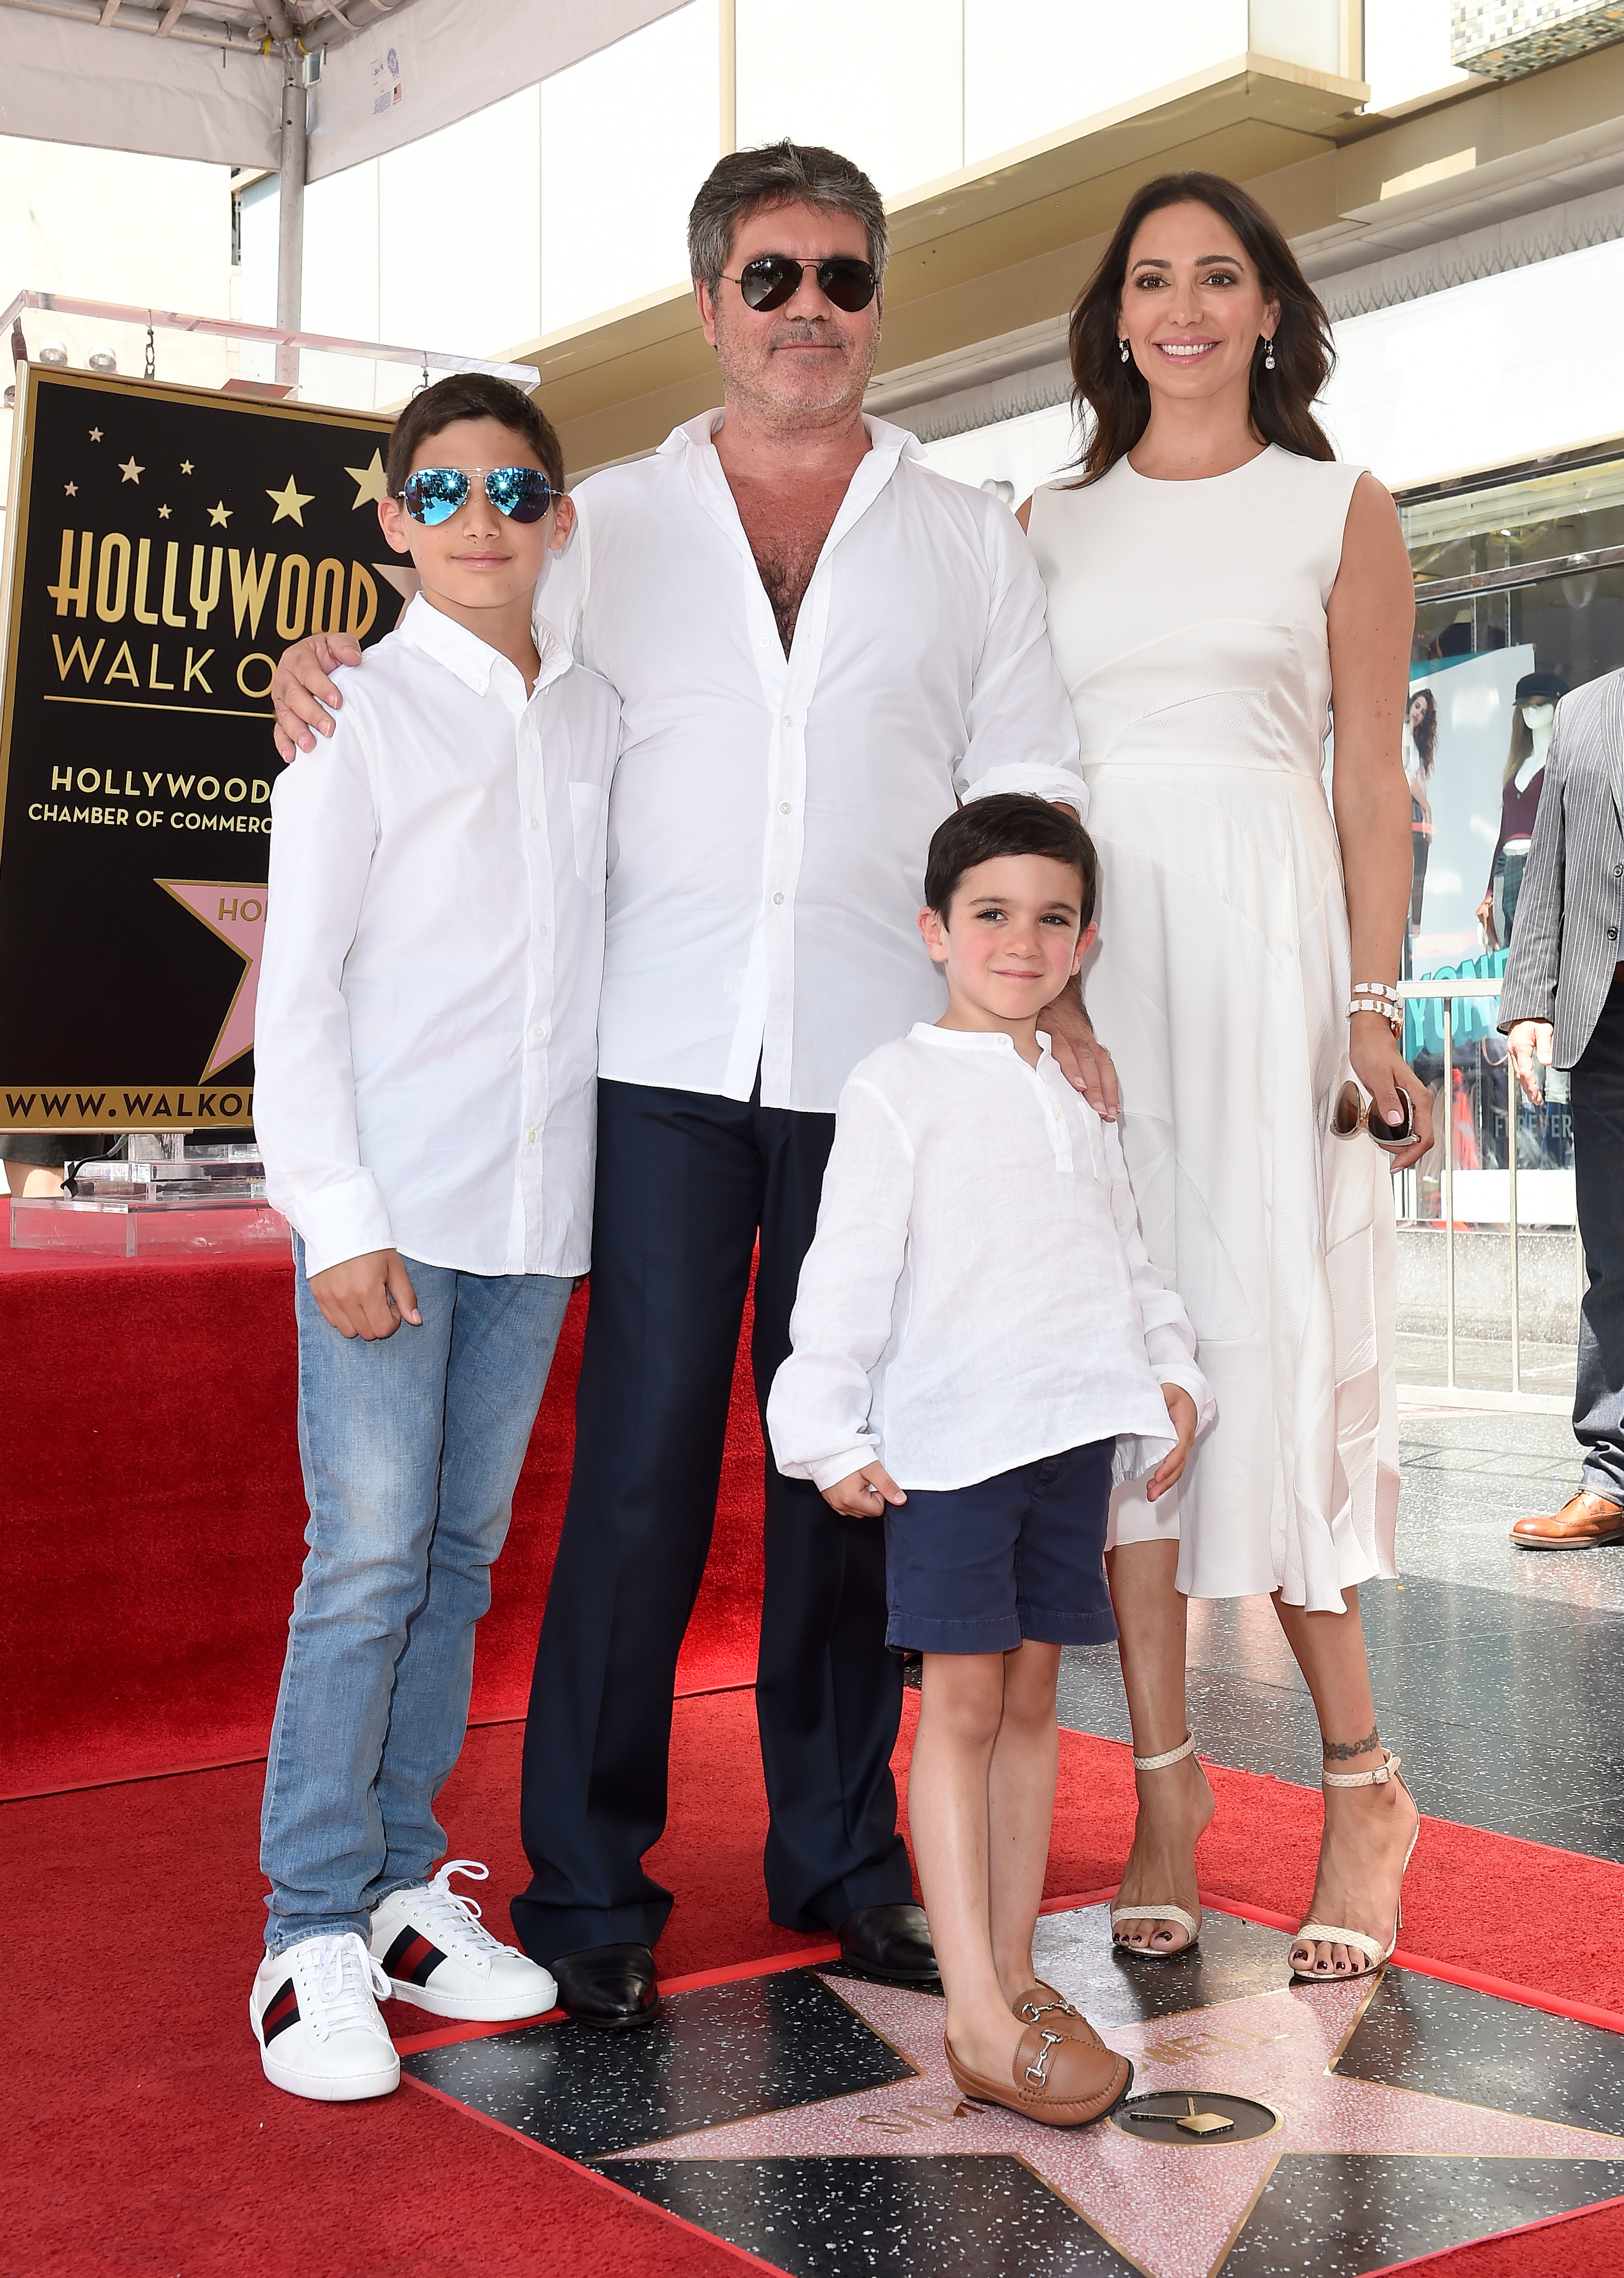 Simon Cowell, Lauren Silverman, Eric Cowell and Adam Silverman at the Hollywood Walk of Fame on August 22, 2018 in Hollywood, California | Source: Getty Images